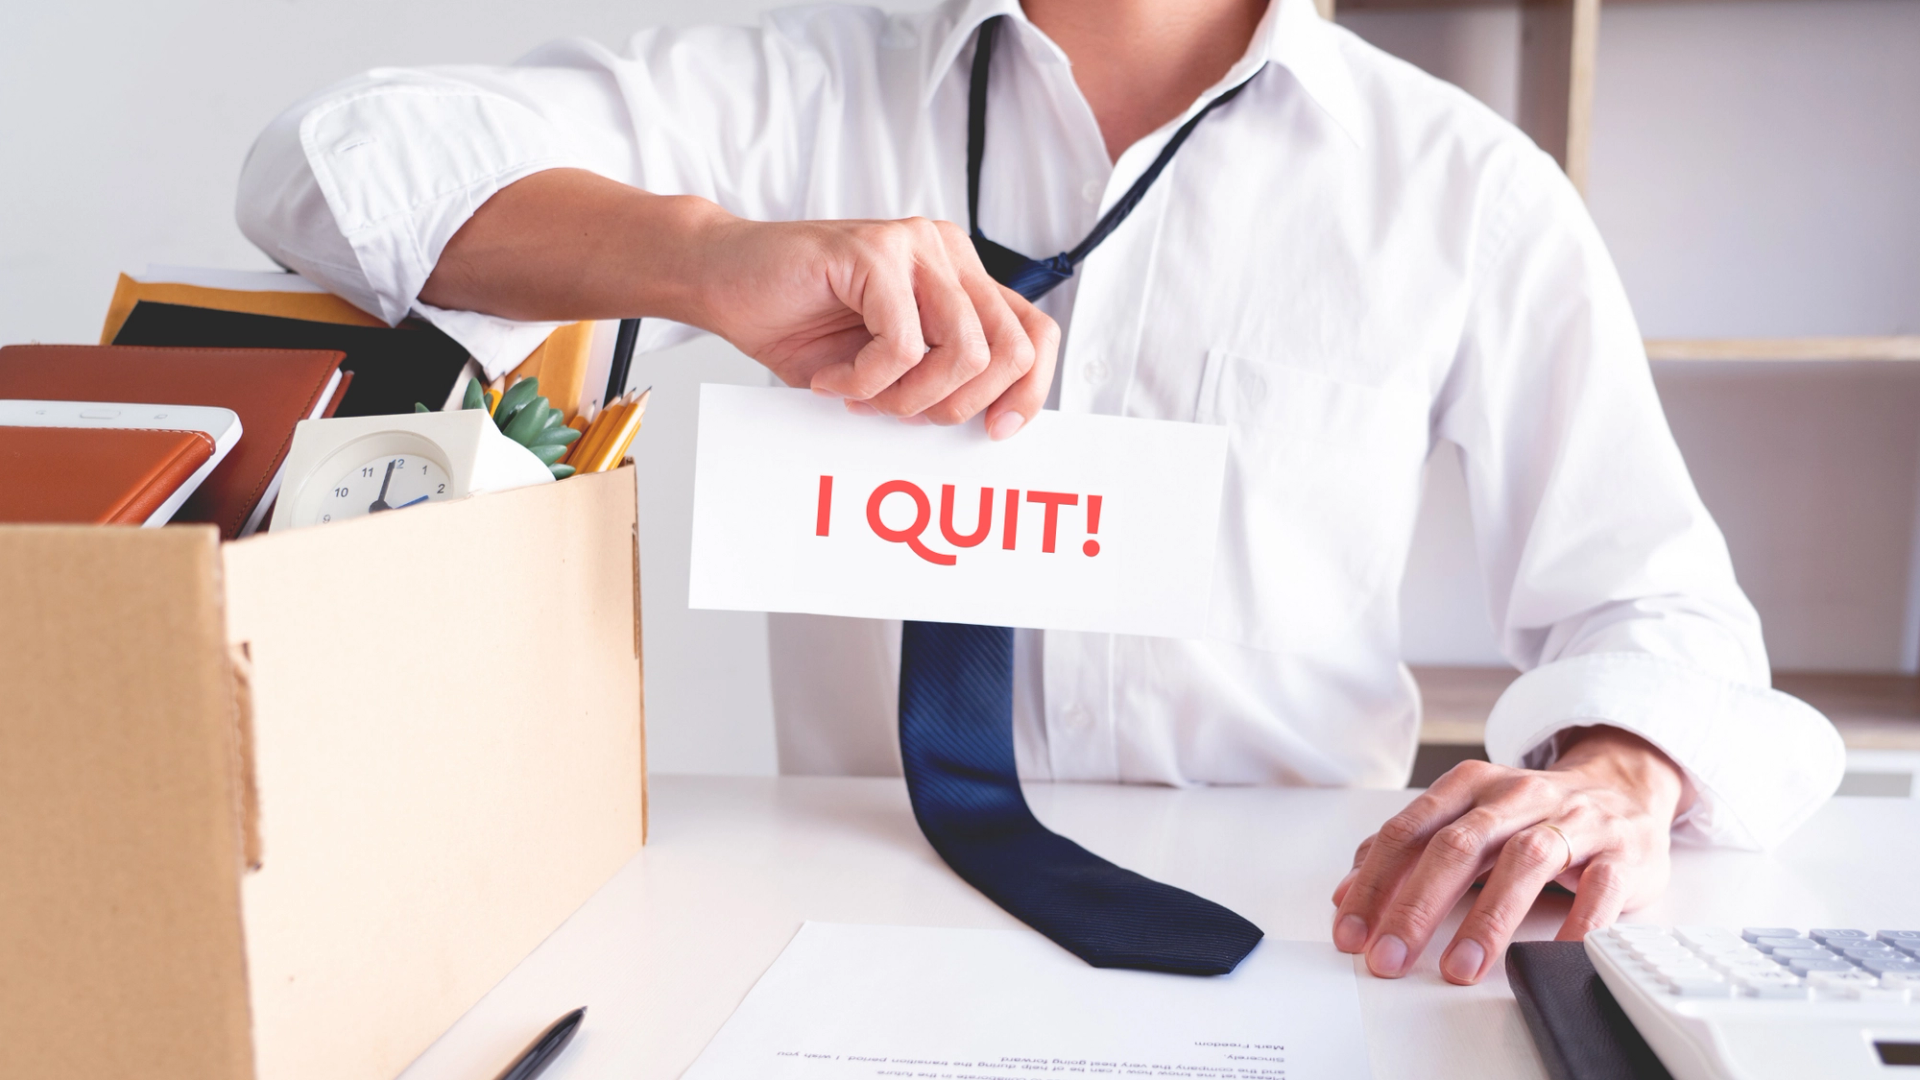 Employee holding a paper with "I quit" written on it.